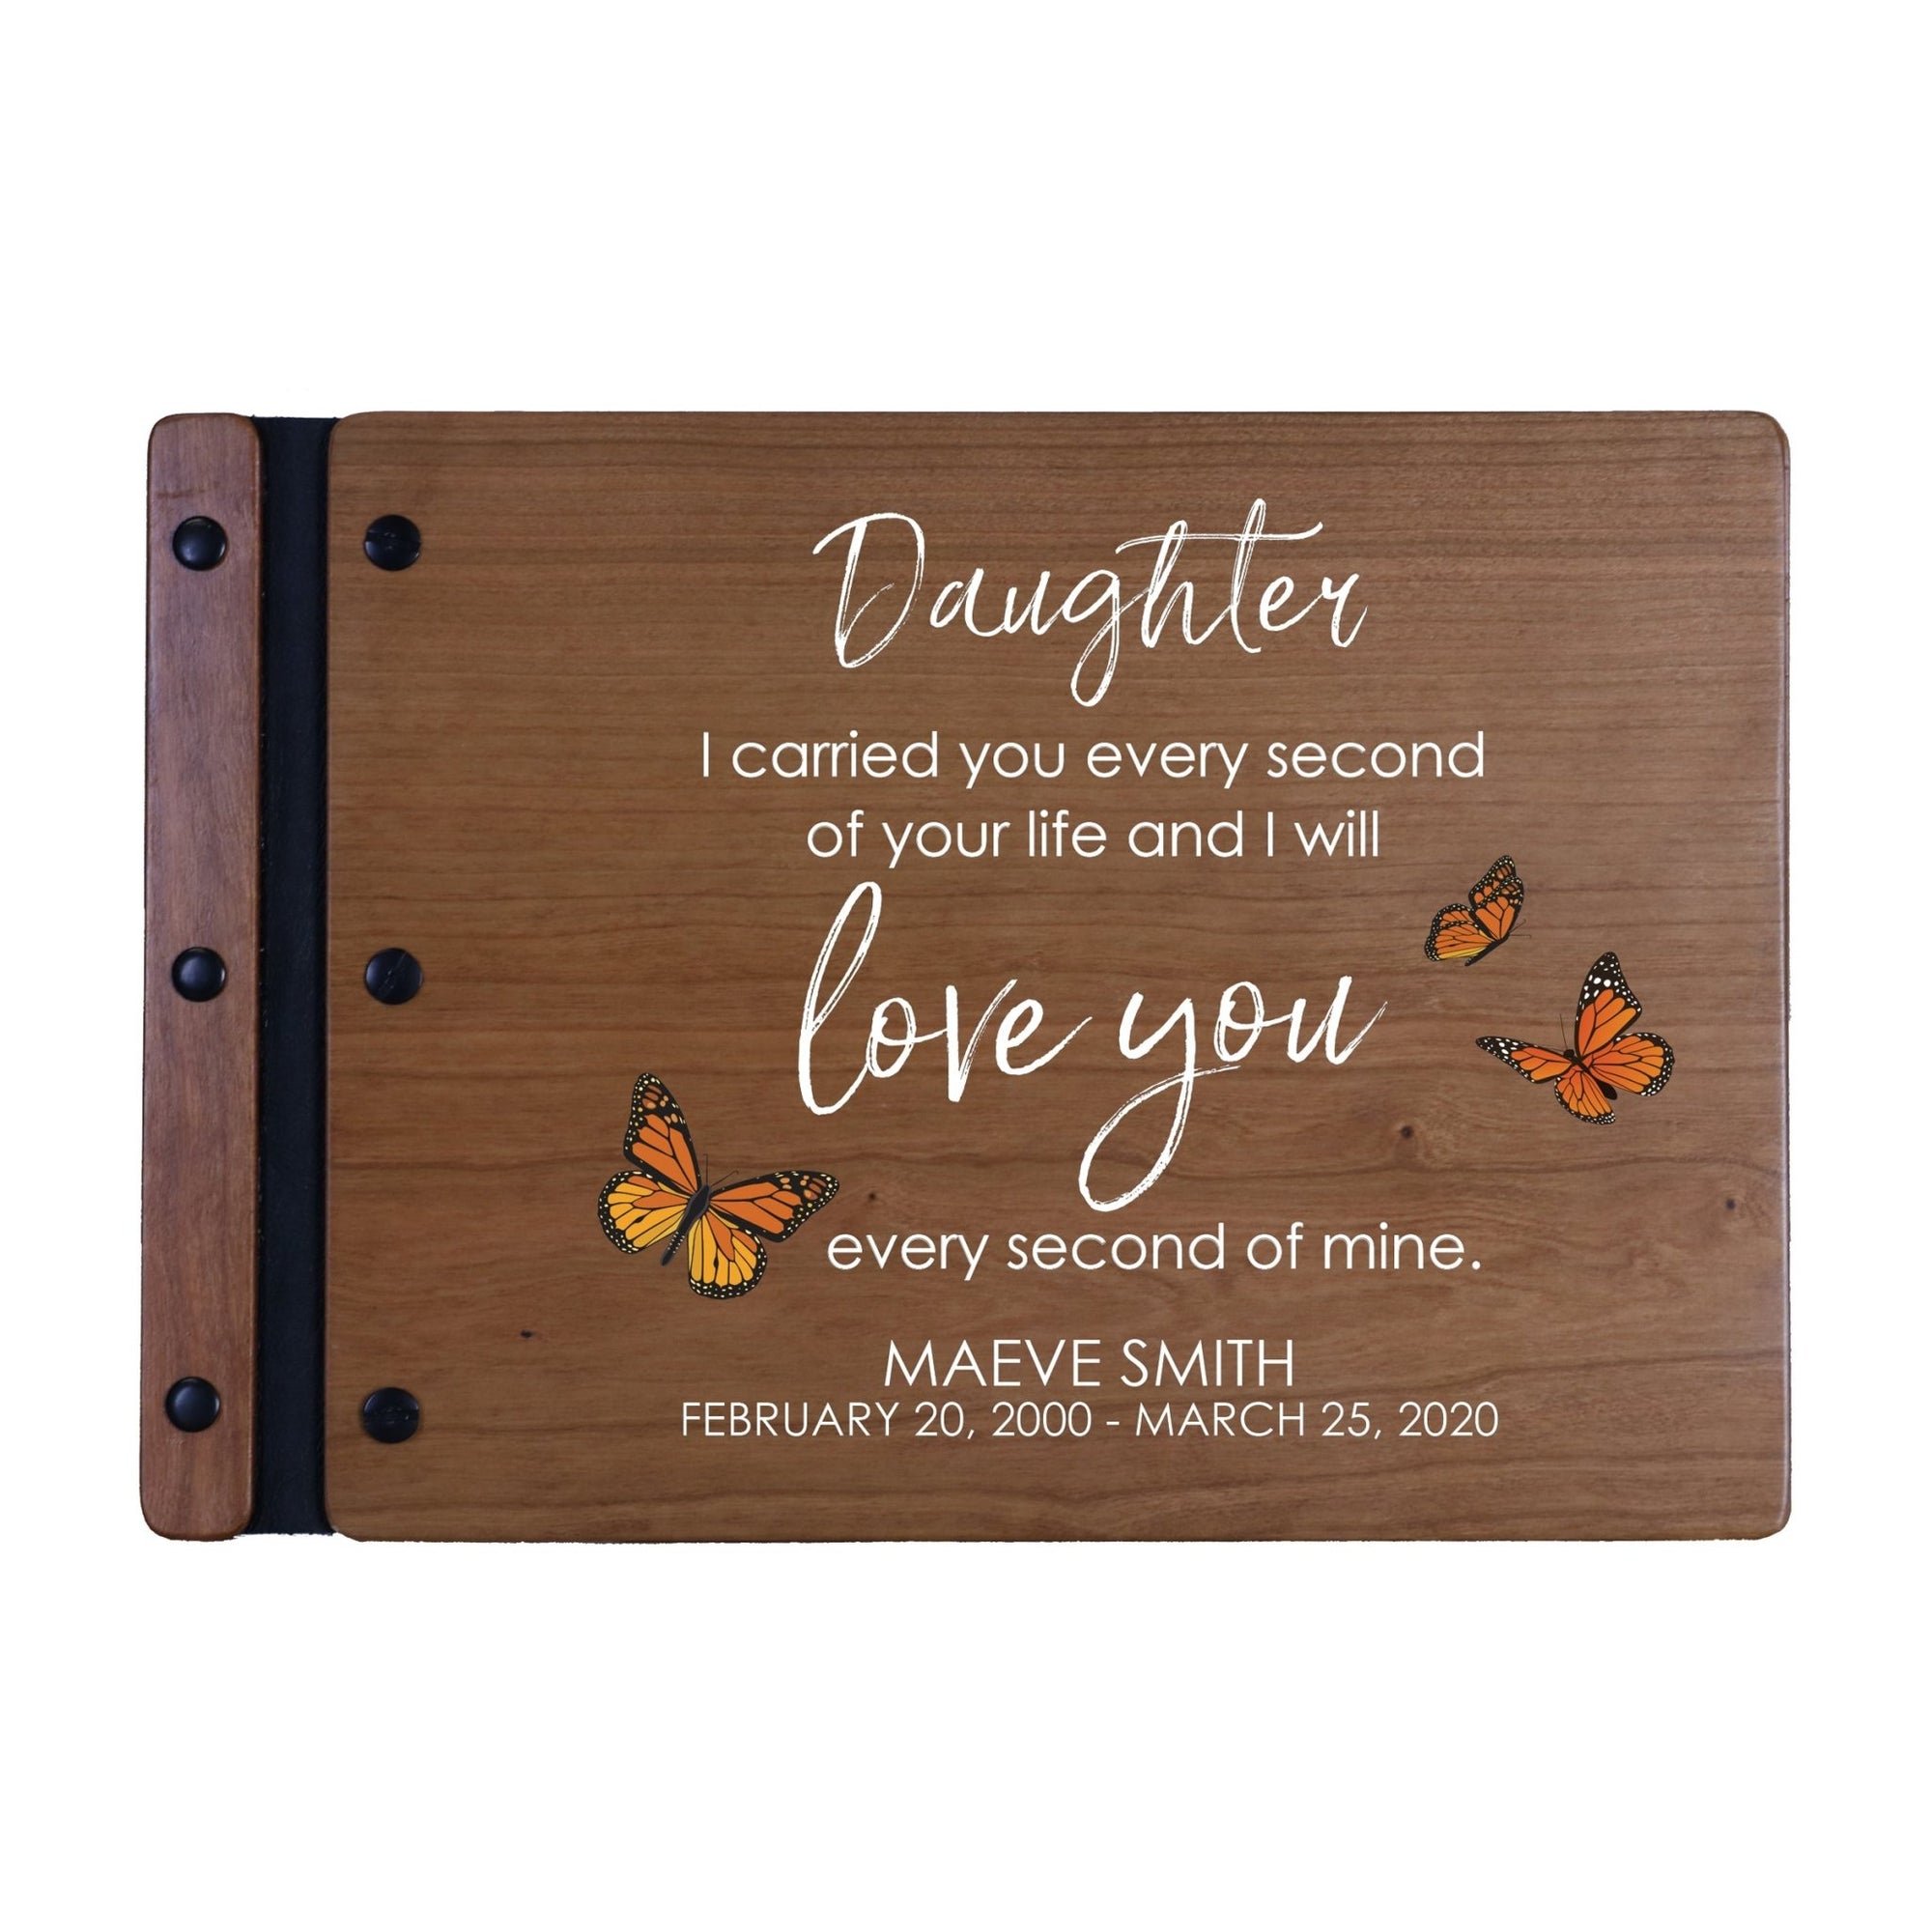 Personalized Medium Wooden Memorial Guestbook 12.375x8.5 - I Carried You Every Second (Cherry) - LifeSong Milestones